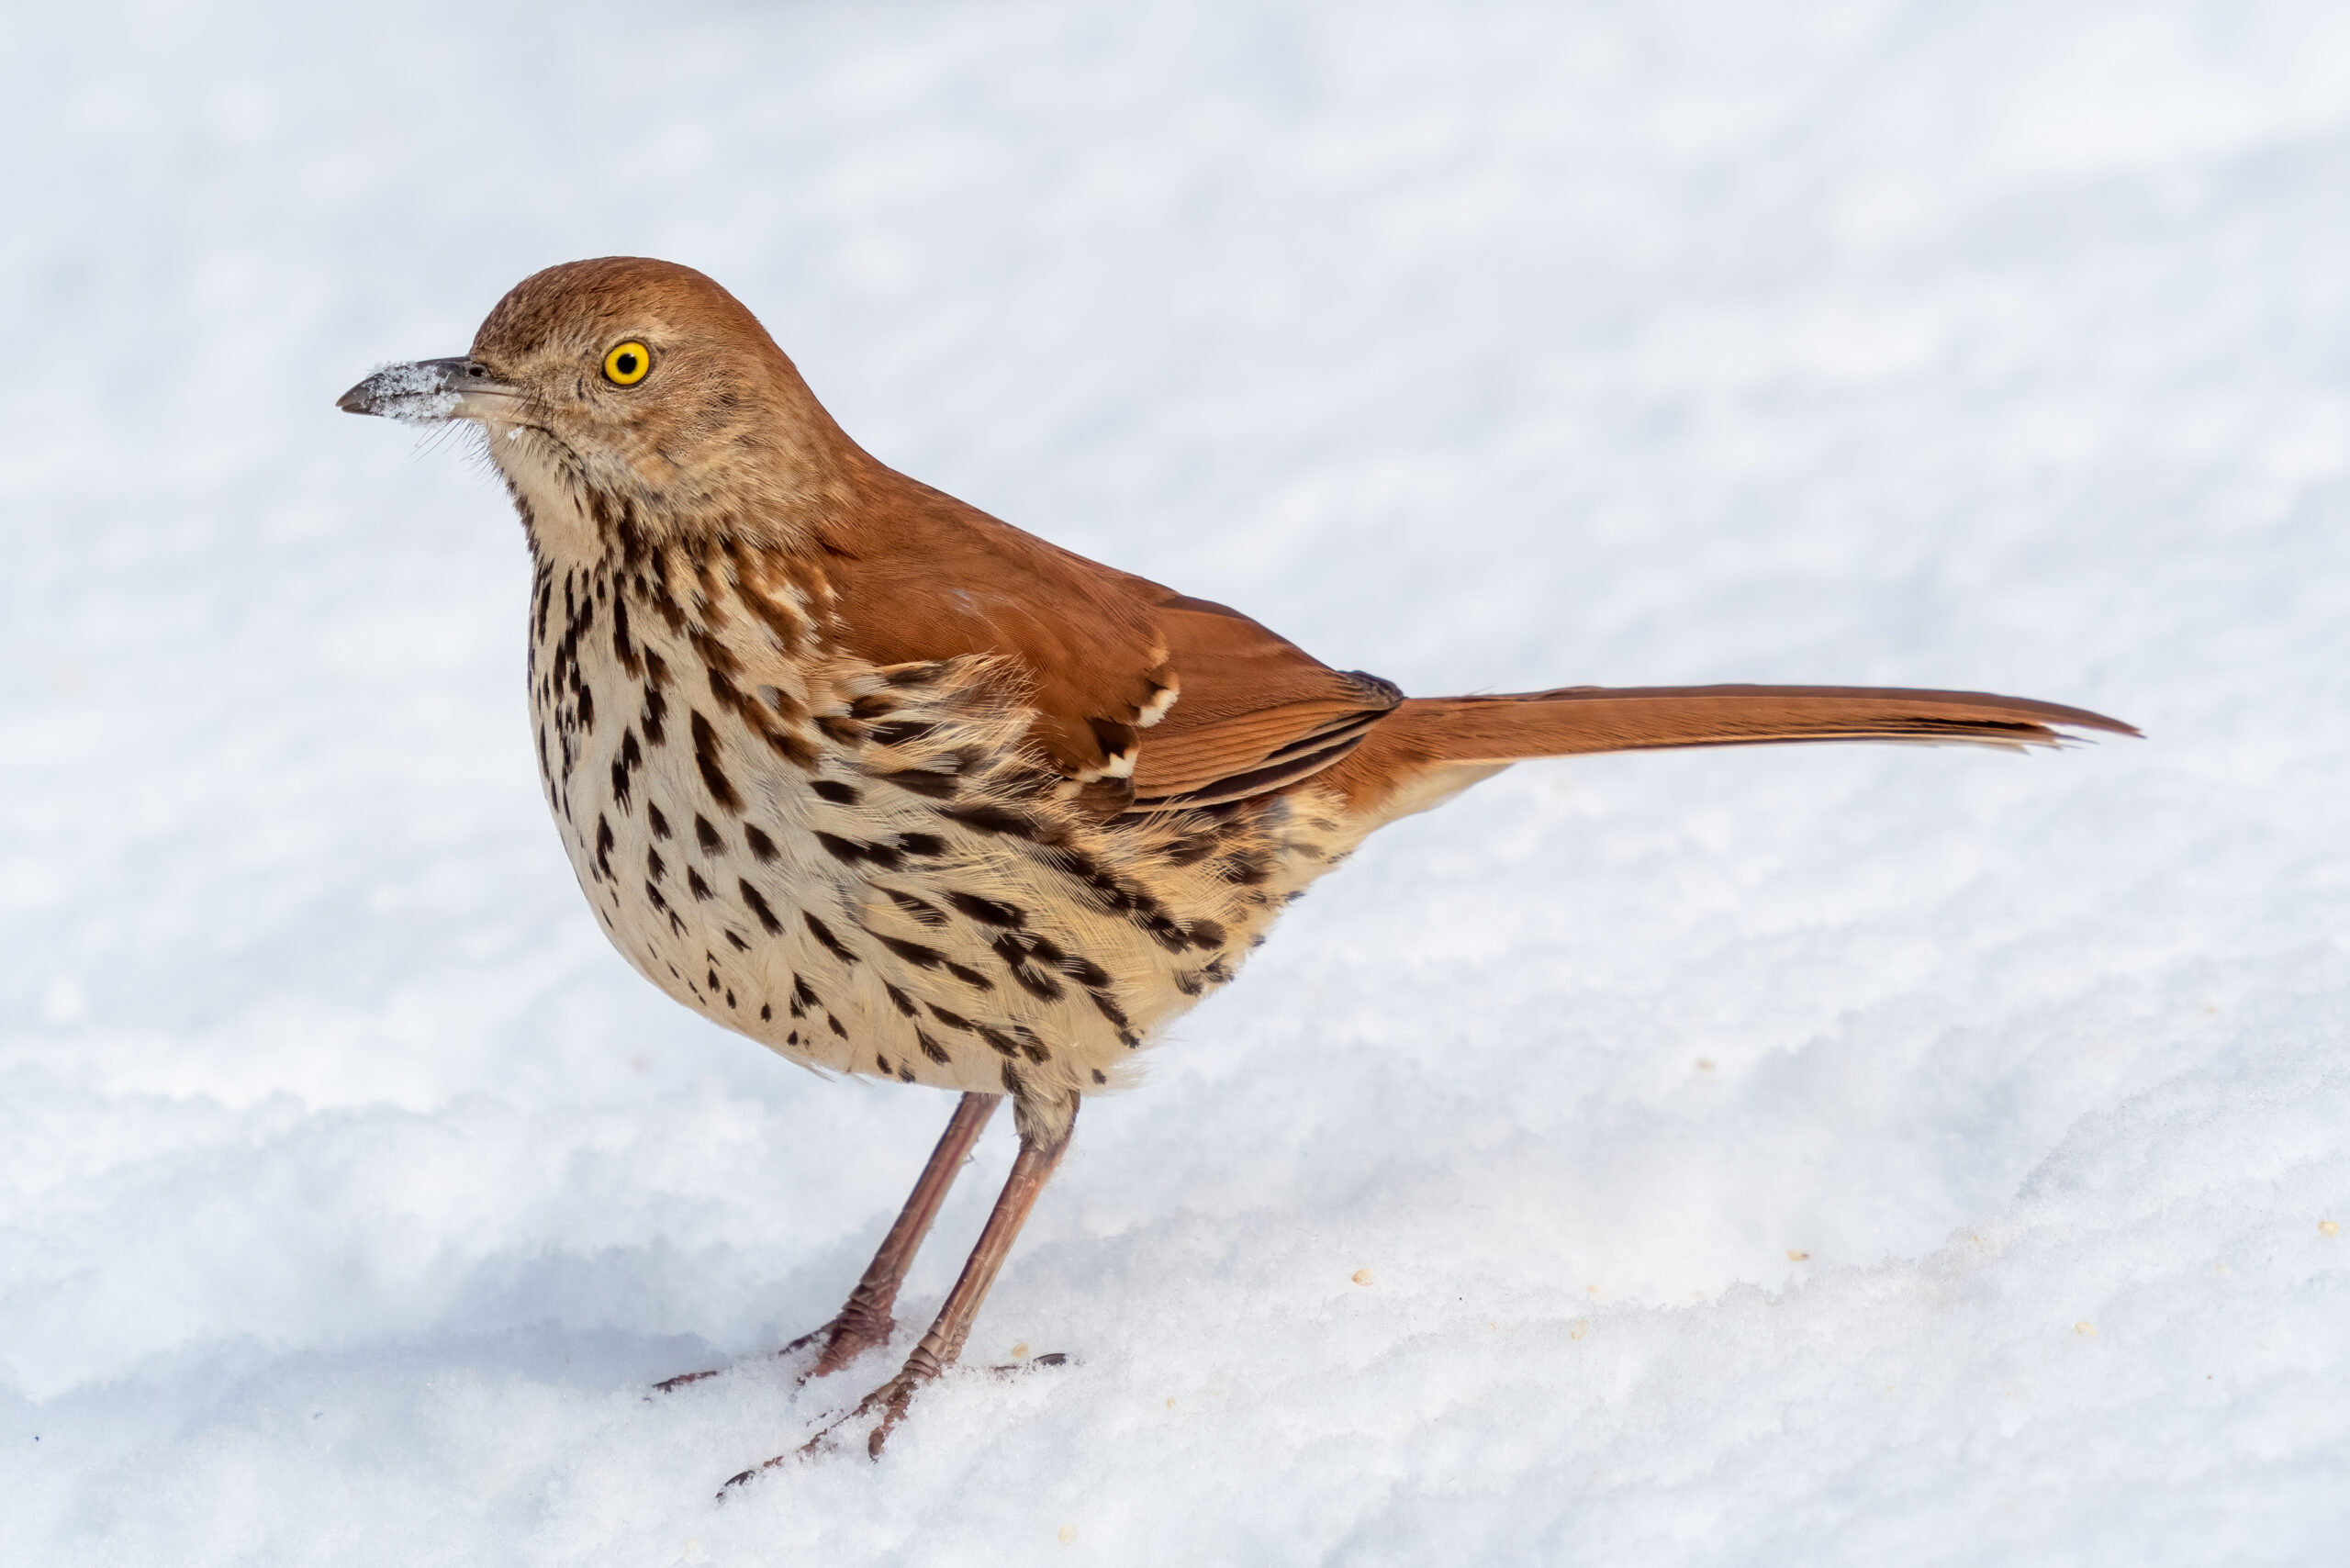 Are brown thrashers native to Pennsylvania?